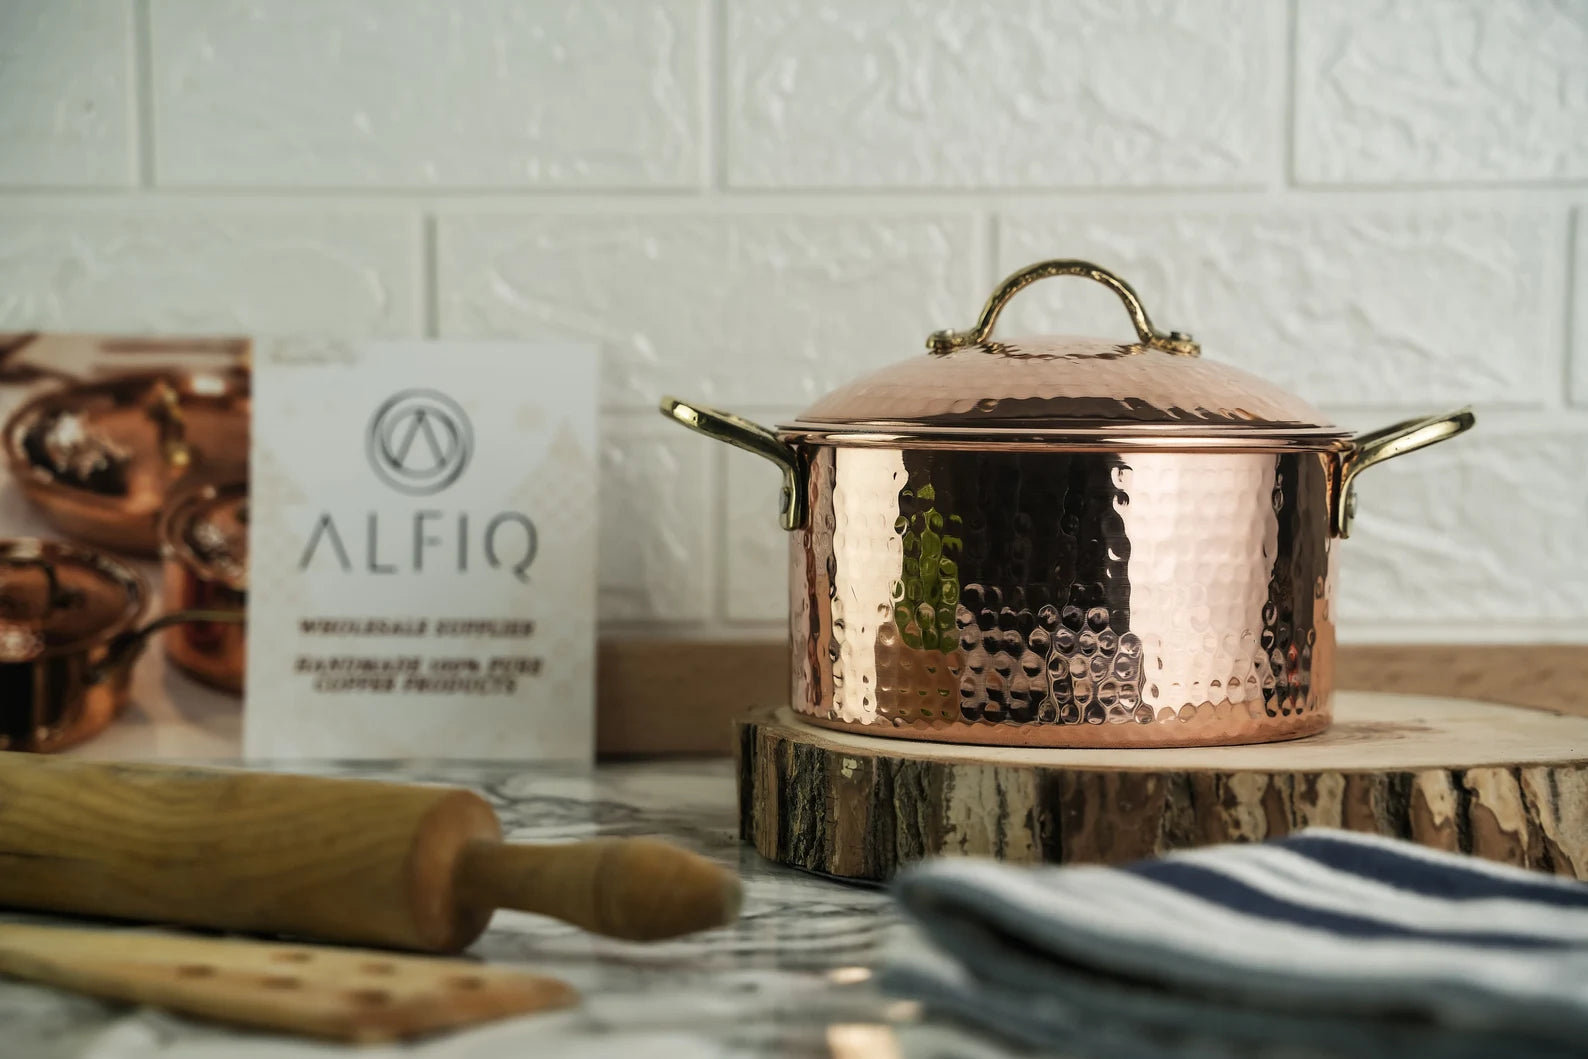 Solid Copper Cooking Pot and Lid Brass Handle 100% Copper Casserole 2 Mm  Thickness Heavy Duty Copper Kitchen Utensils 